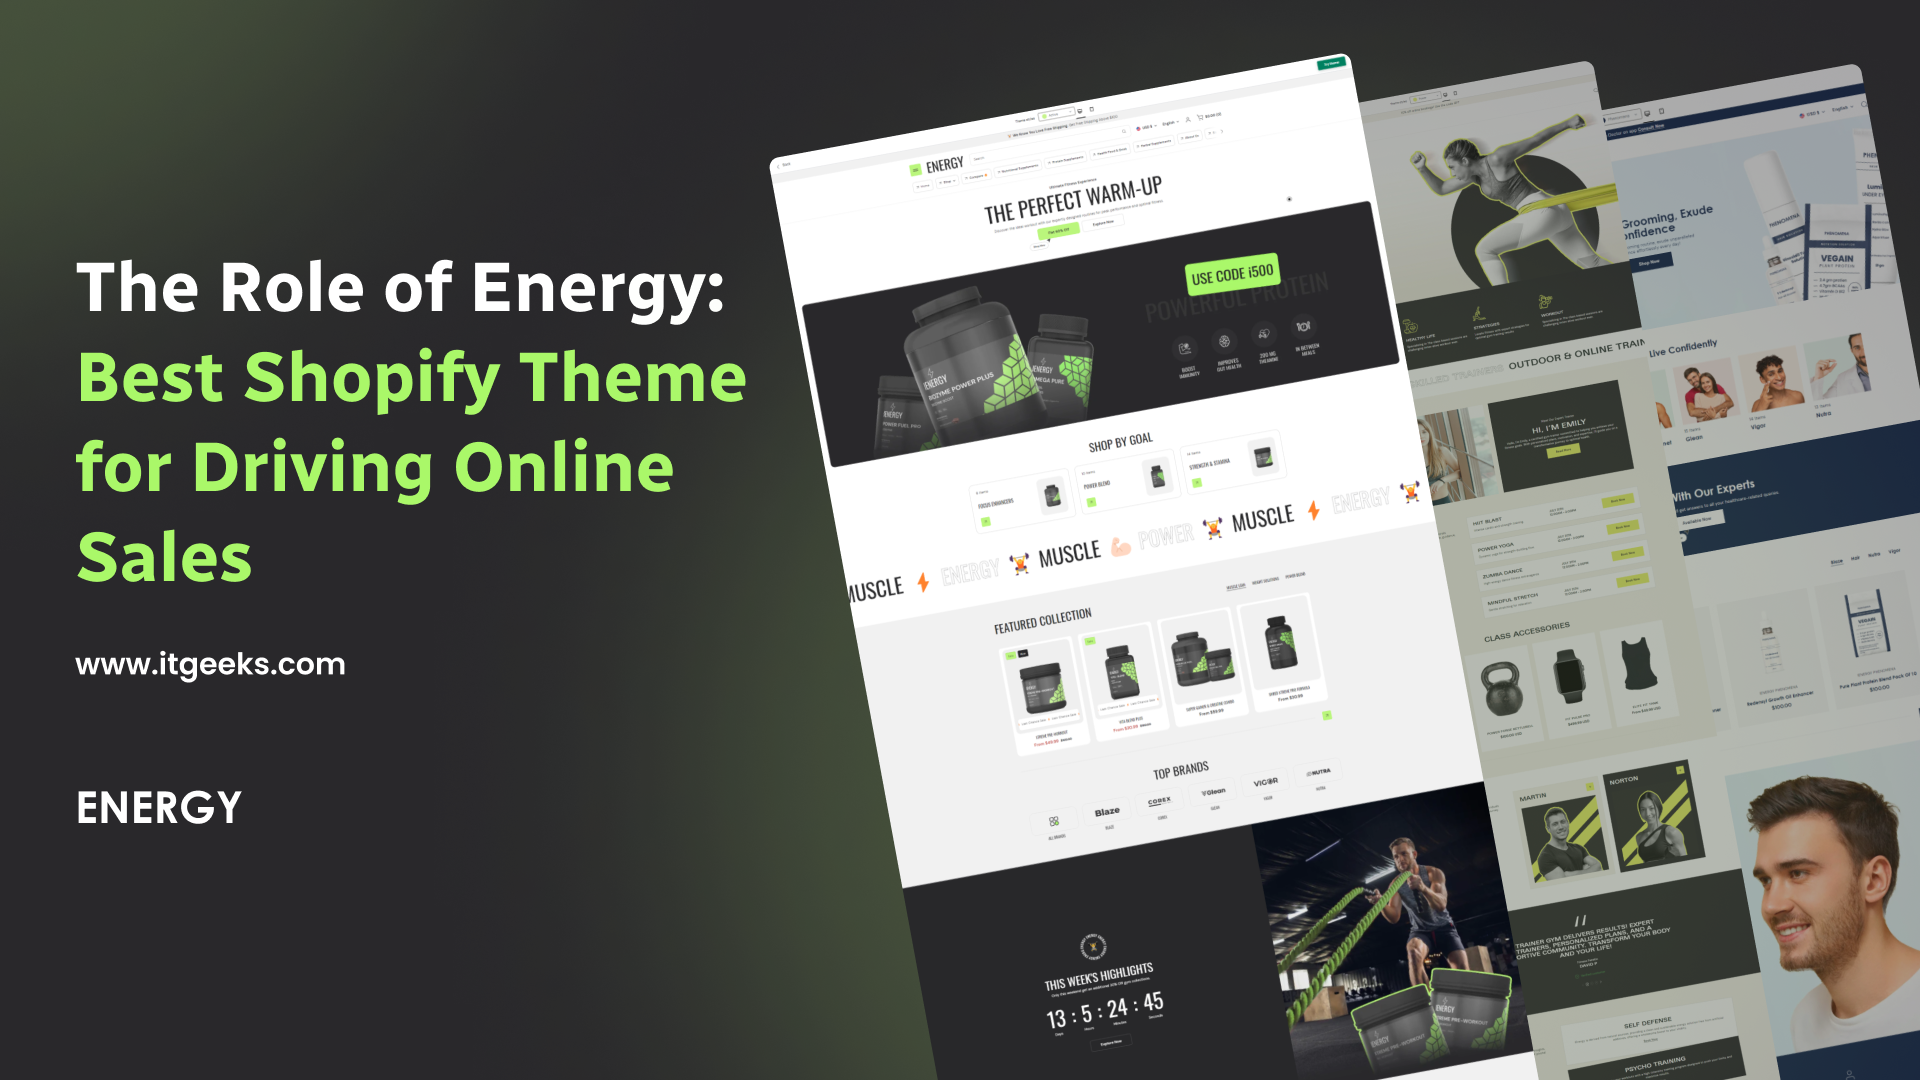 The Role of Energy: Best Shopify Theme for Driving Online Sales